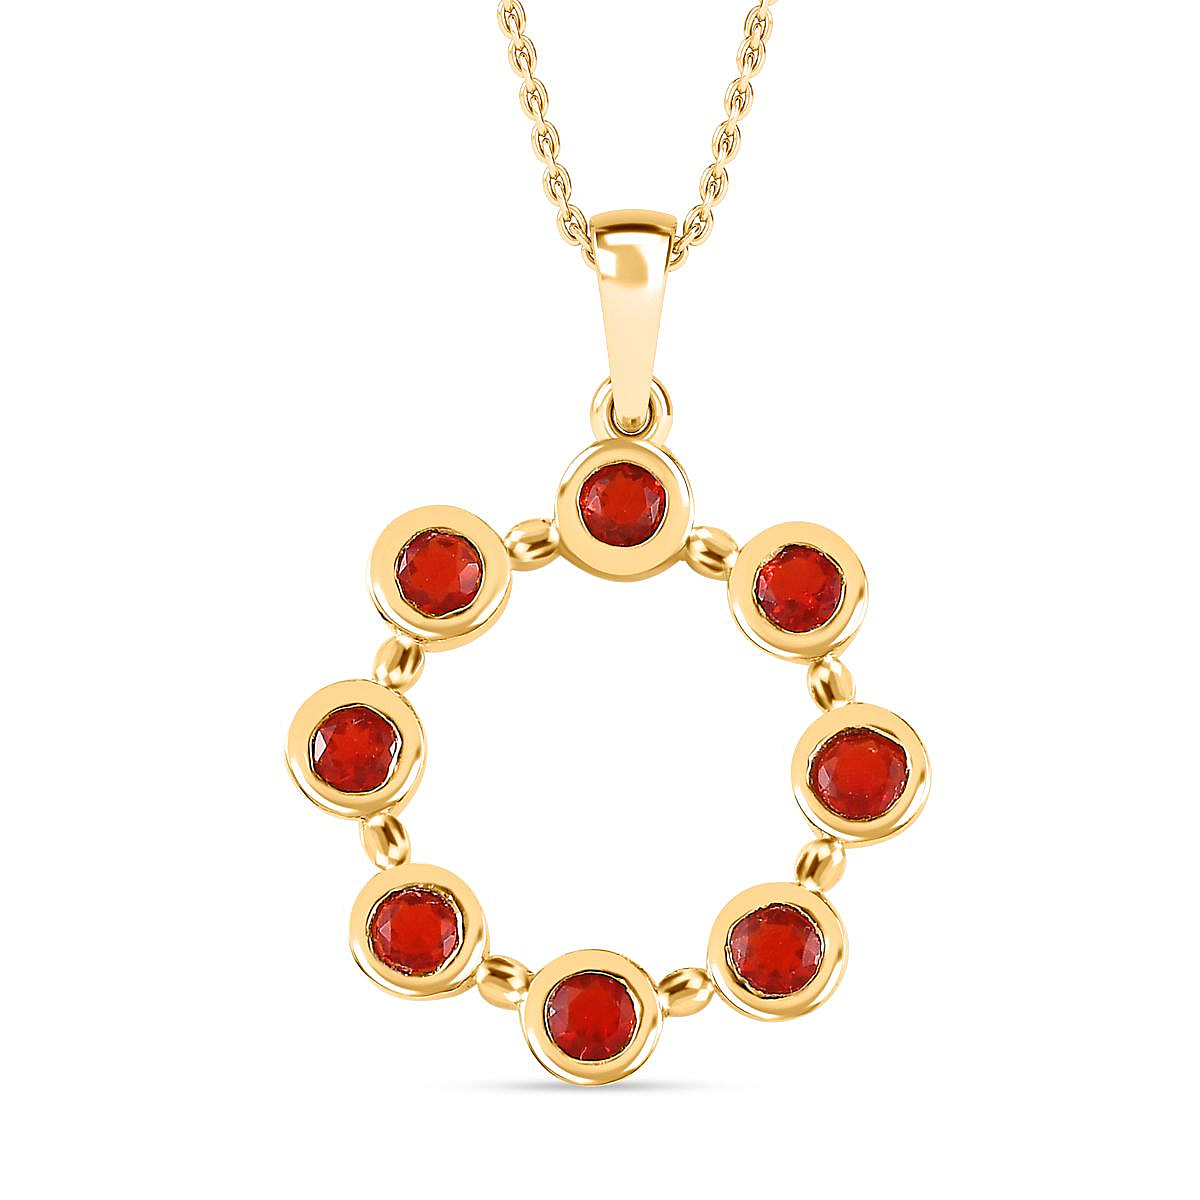 Salamanca Fire Opal Eclipse Pendant with Chain (Size 20) in 18K Gold Vermeil Sterling Silver